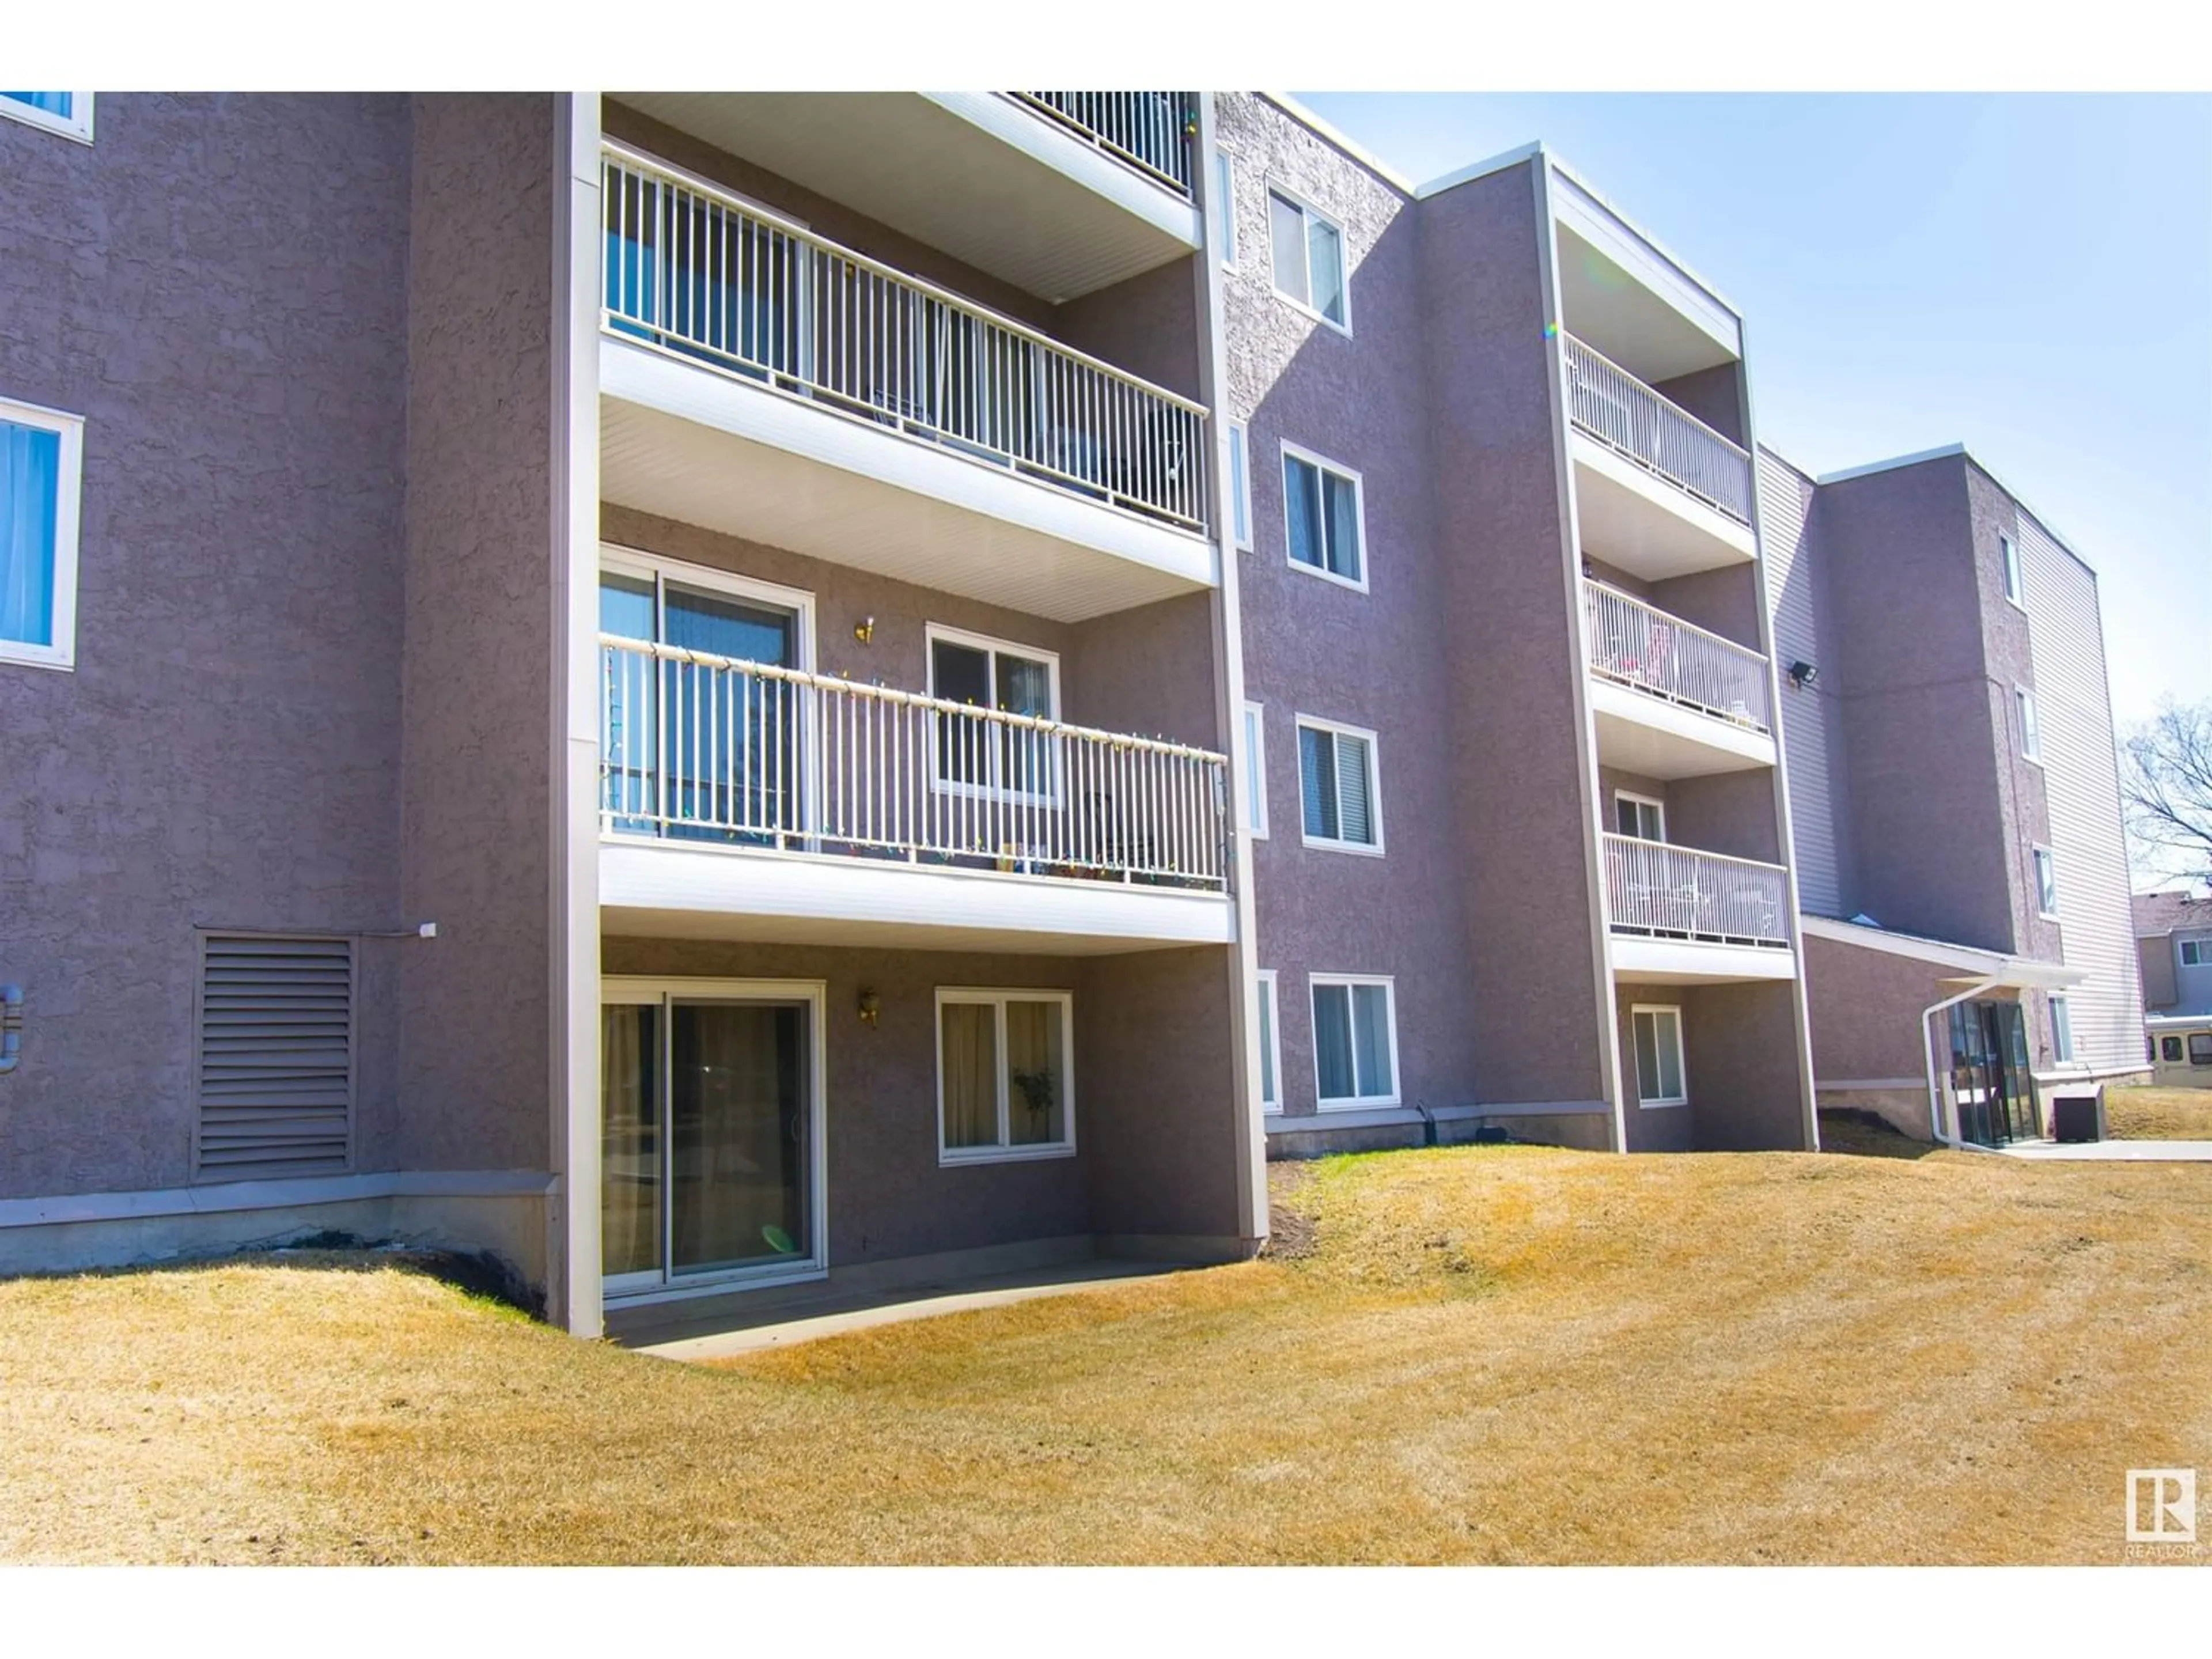 A pic from exterior of the house or condo for #204 18204 93 AV NW, Edmonton Alberta T5T2V2